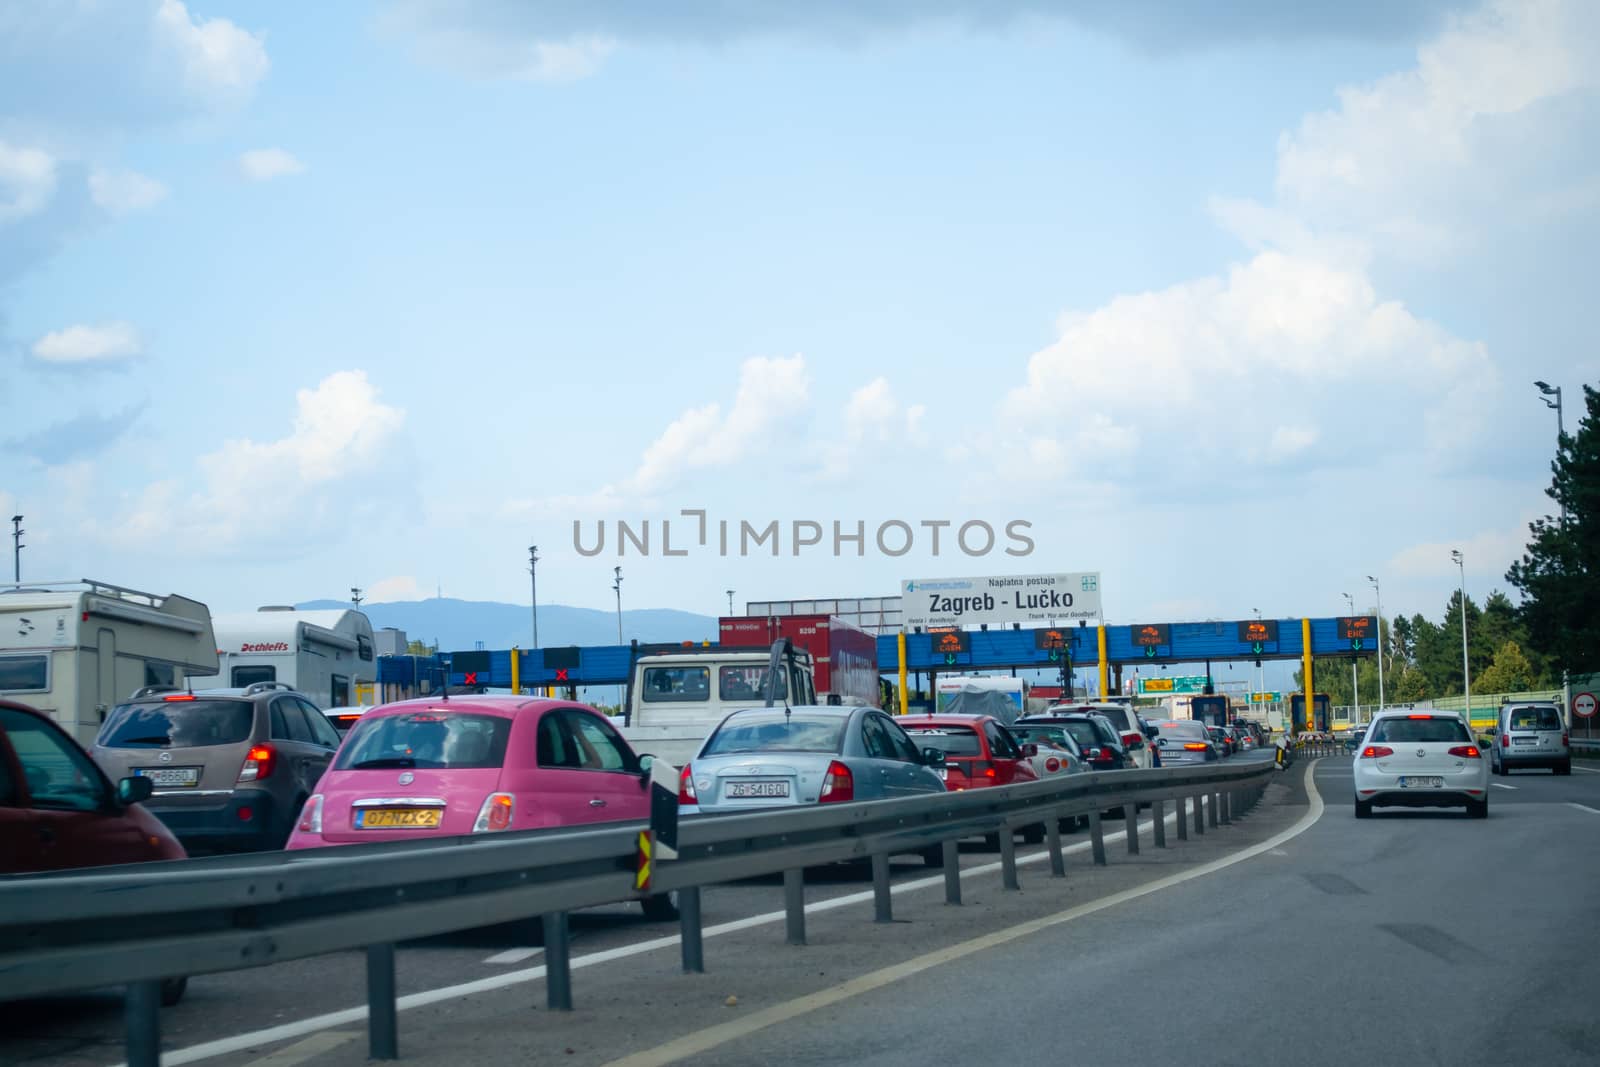 Heavy trafiic with congestions at Toll gate Lucko in Zagreb, Croatia during touristic season by asafaric